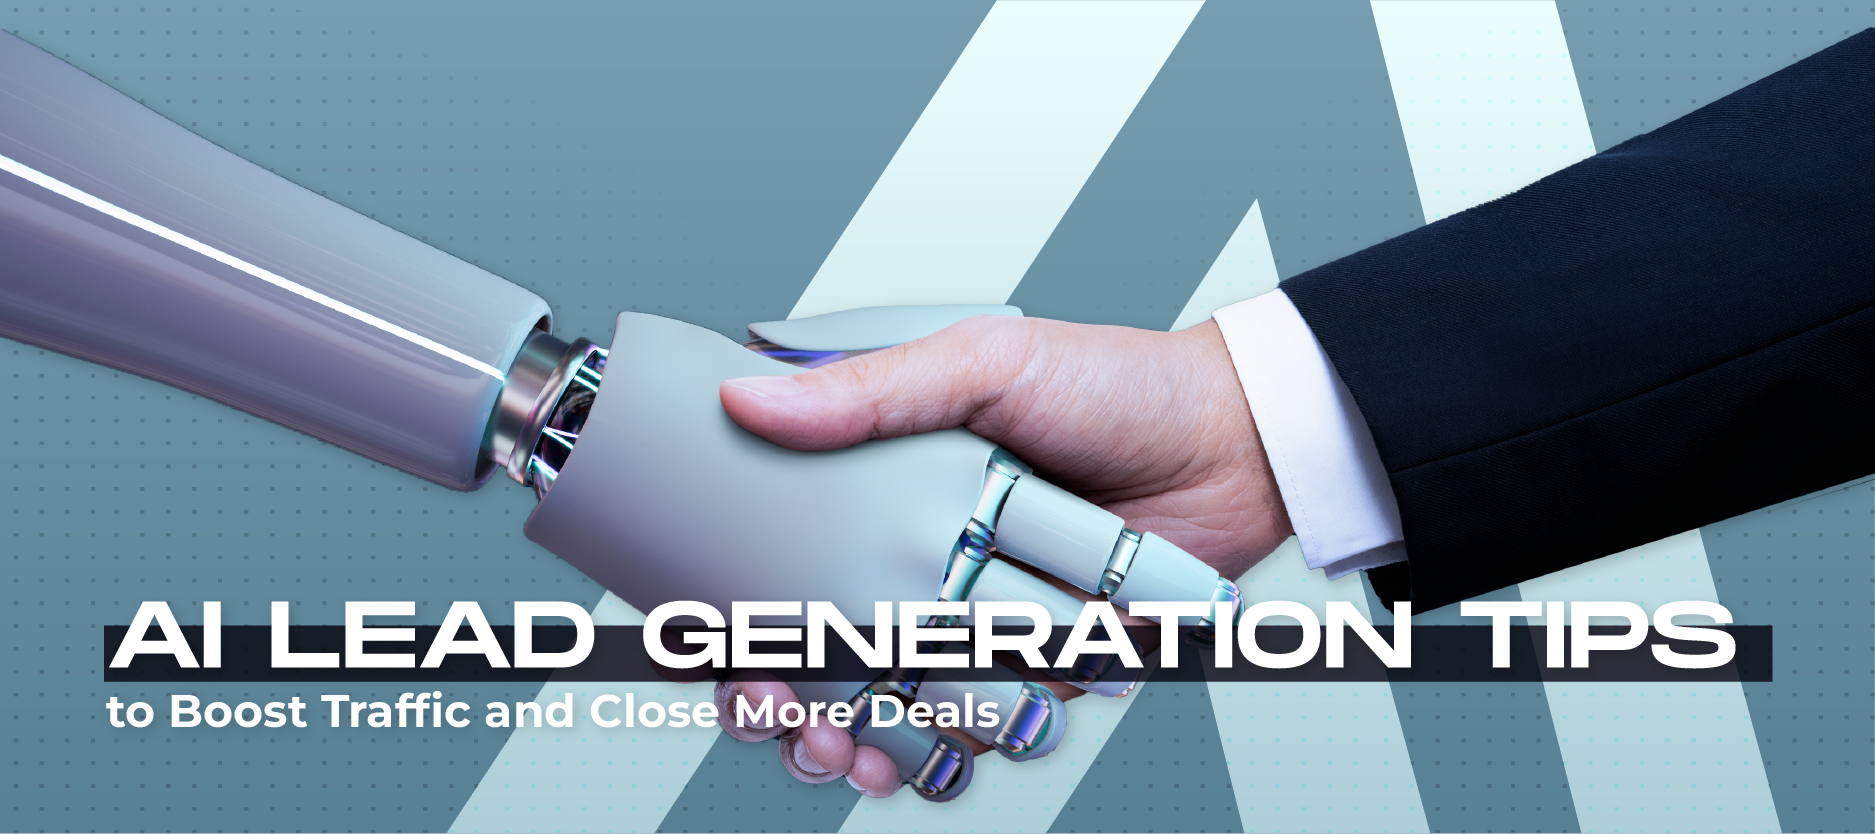 AI Lead Generation Tips to Boost Traffic and Close More Deals-03